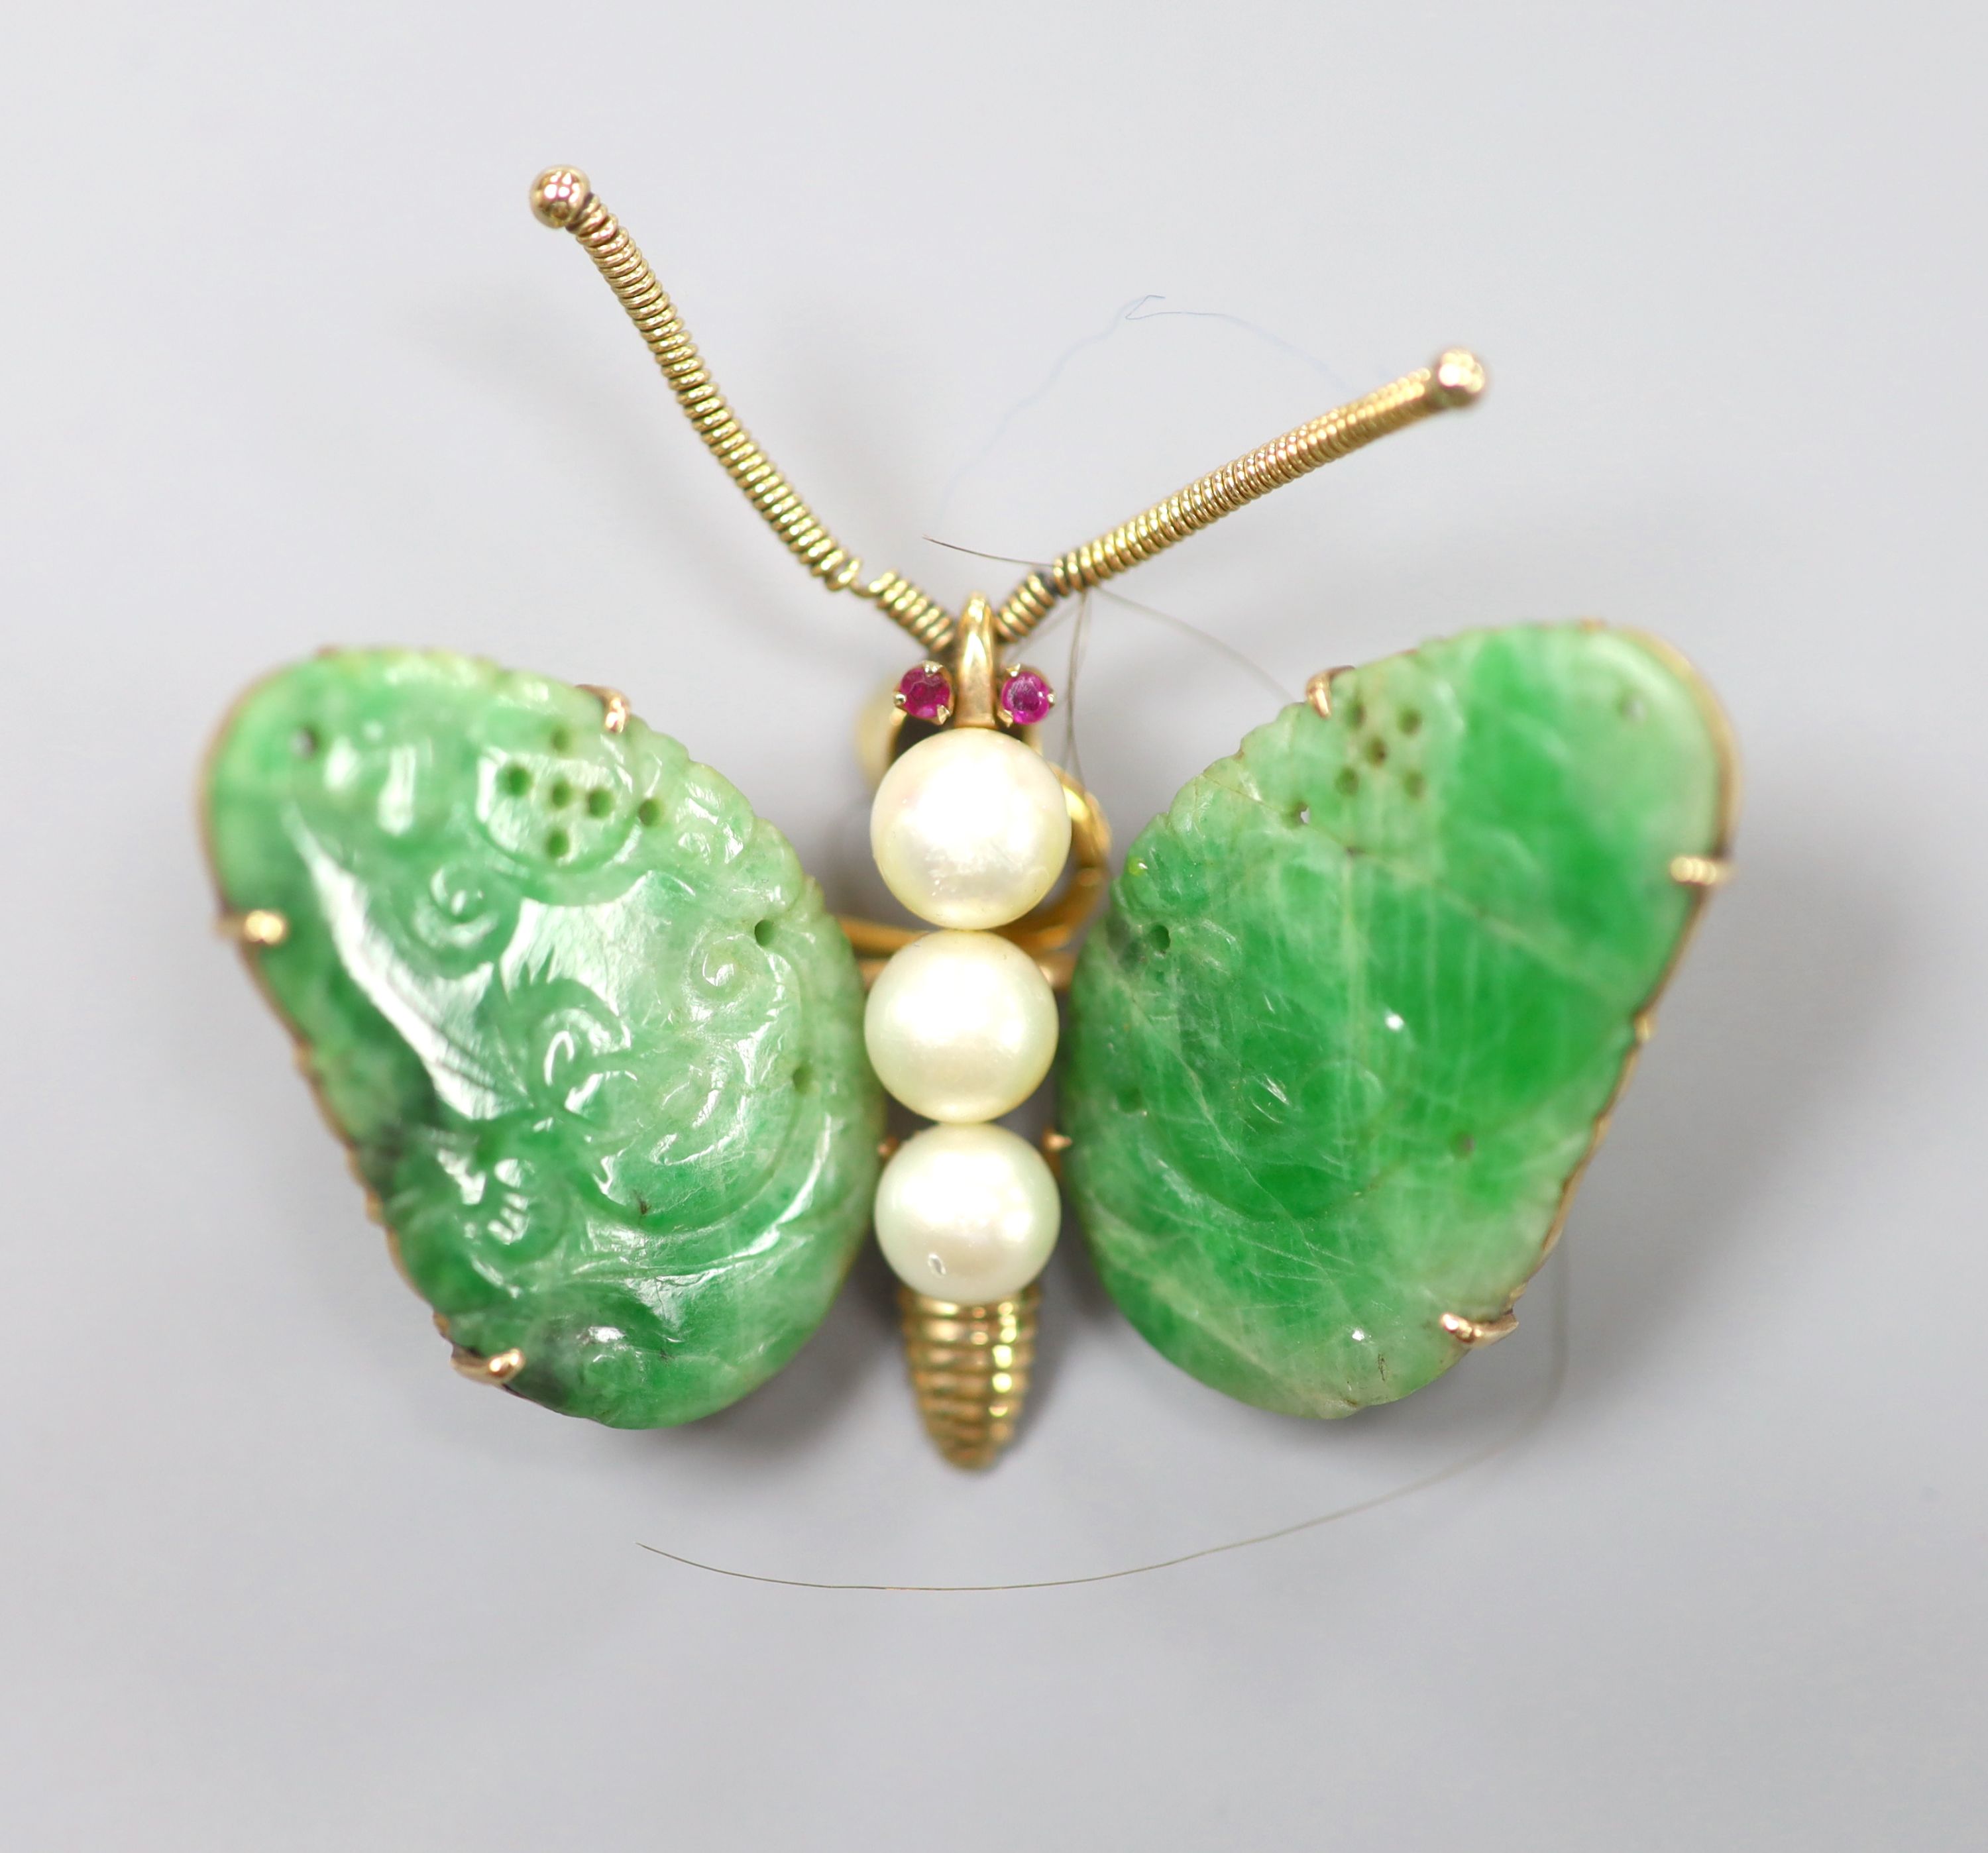 A 20th century 14k mounted jade and cultured pearl set butterfly pendant brooch,